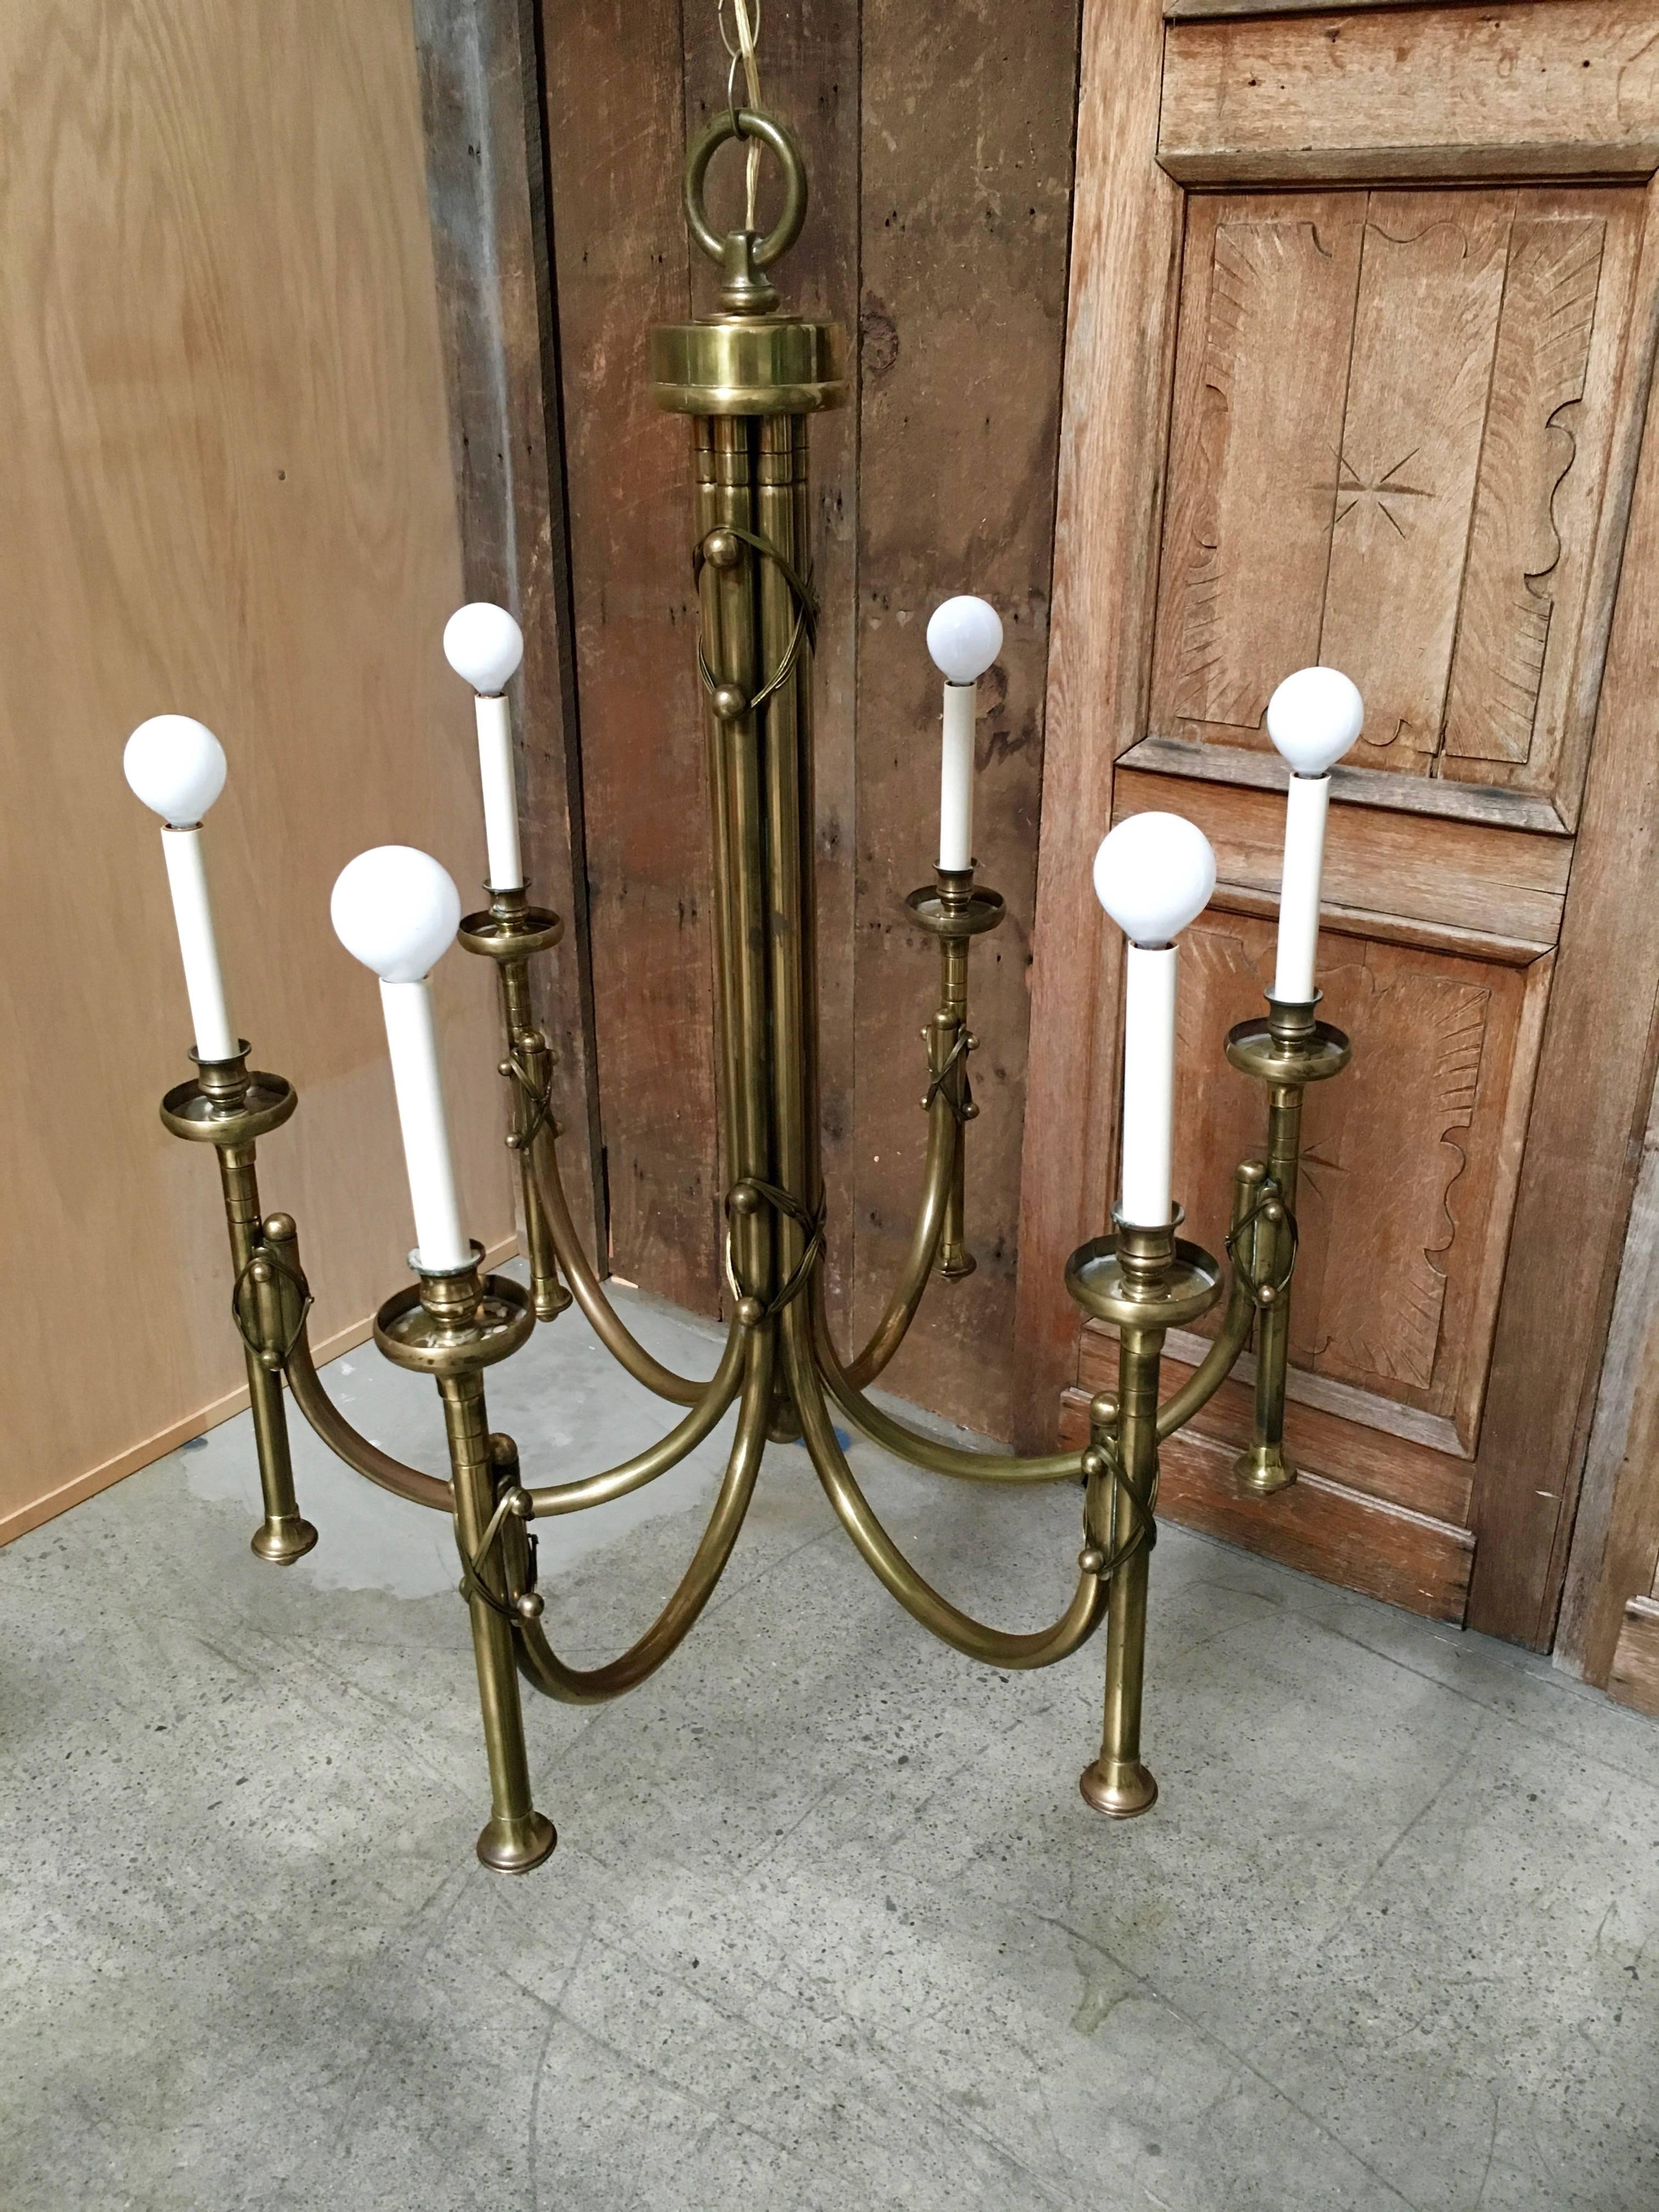 This is a great solid brass chandelier with X strap fasteners on the centre column and the six arms. There seems to be a little Tommi Parzinger flair to this piece.